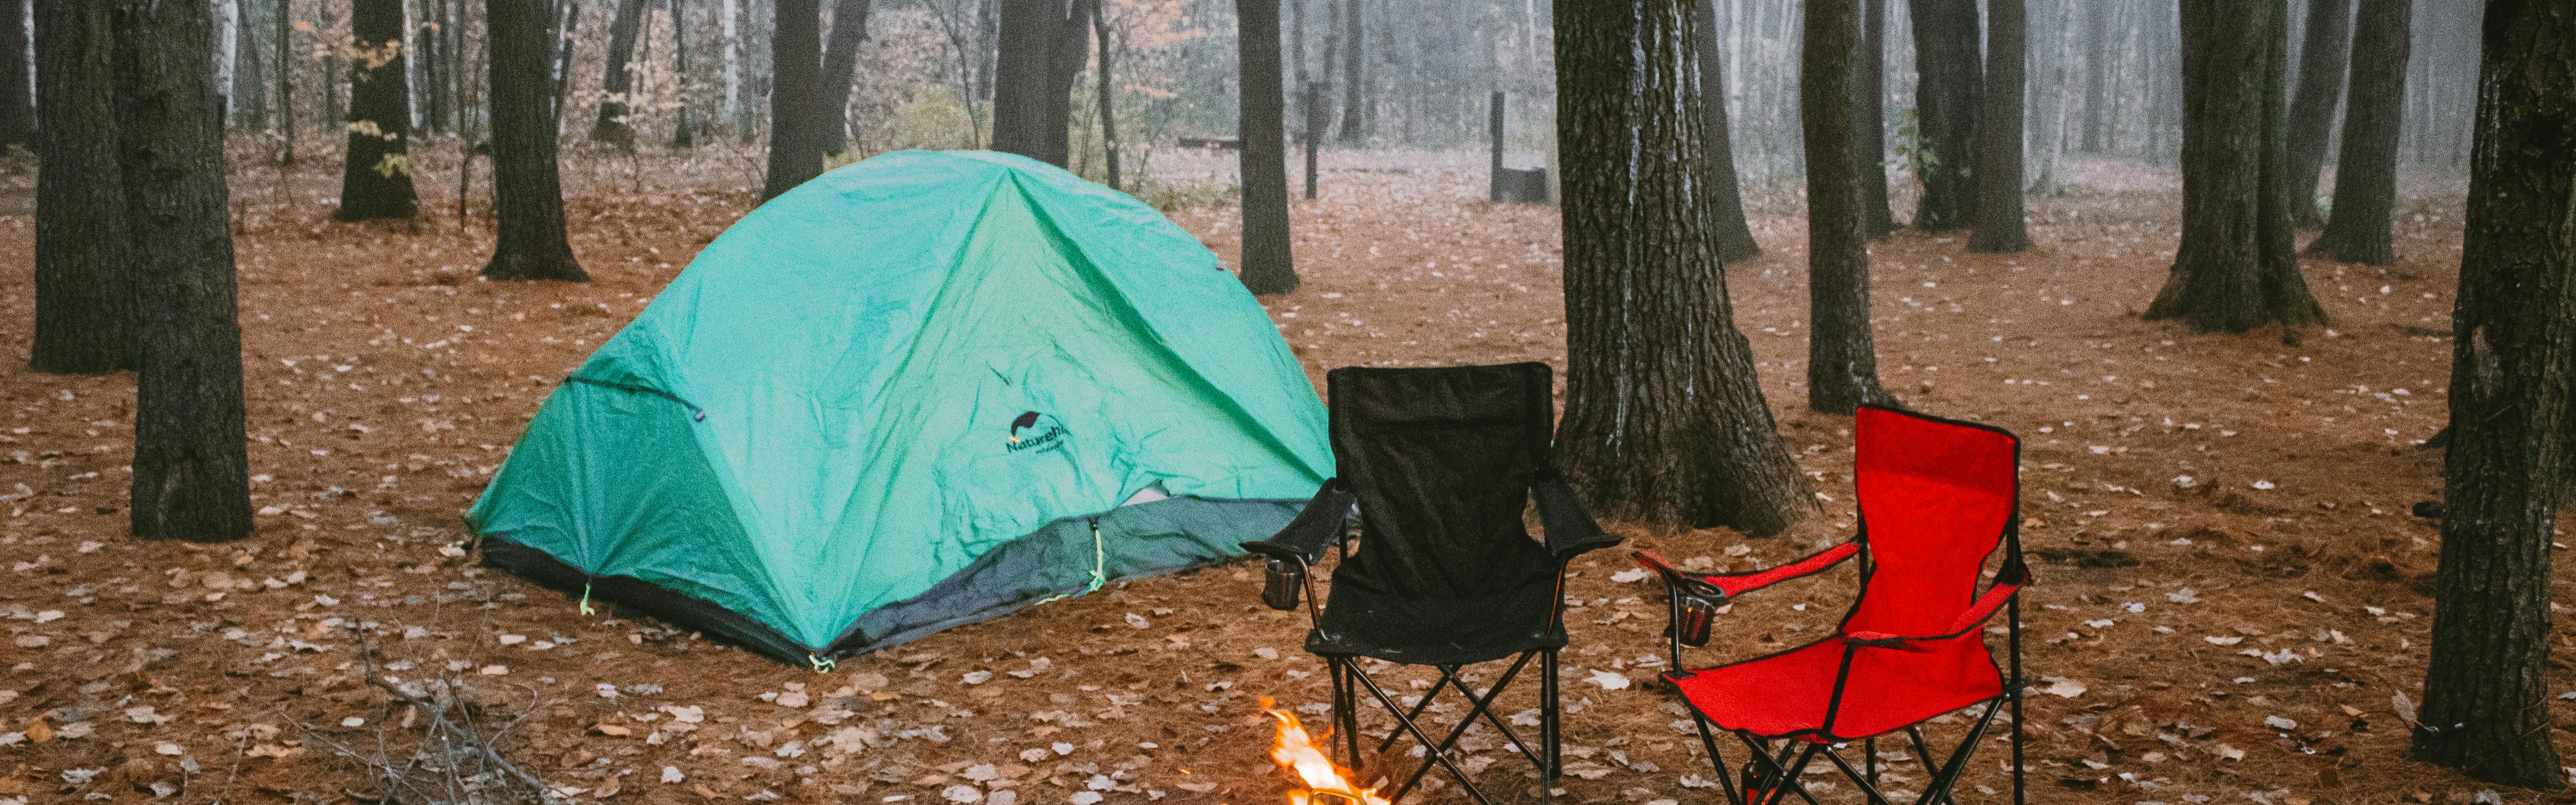 A tent in the rain. There are some camp chairs sitting around a fire pit near the tent.